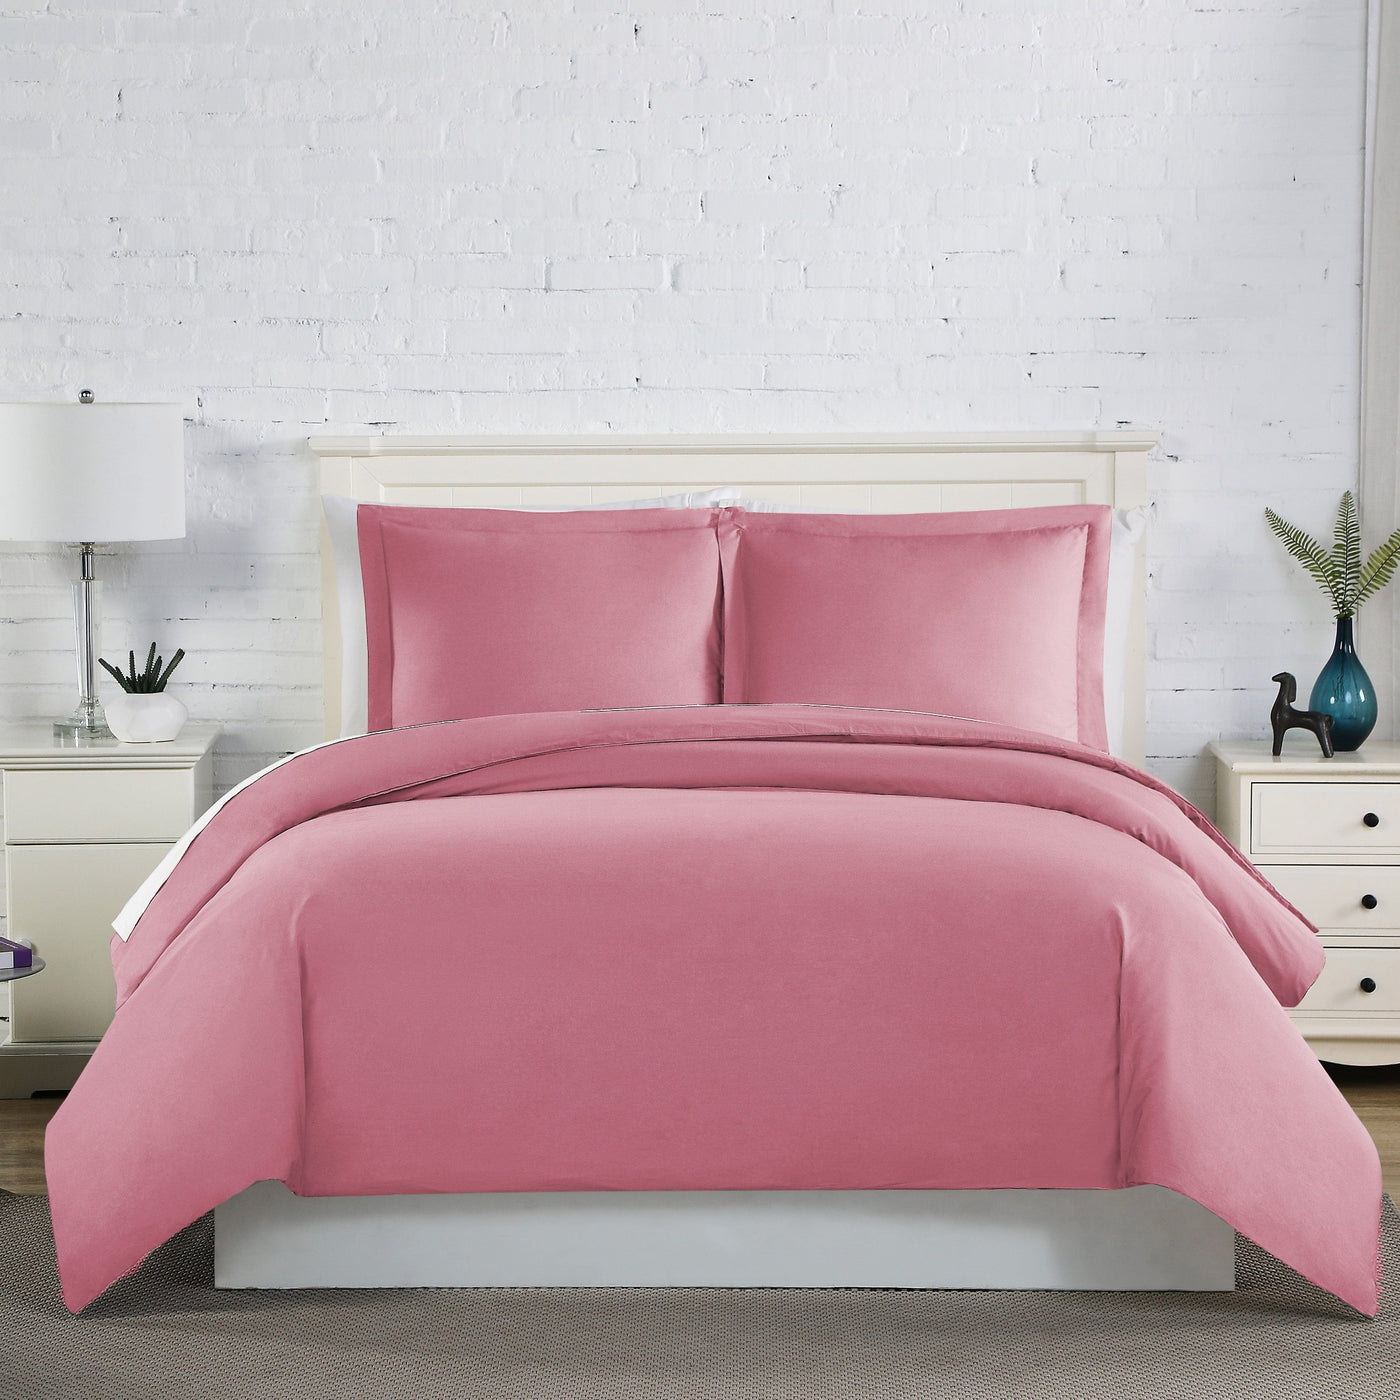 Front View of Everyday Essentials Duvet Cover Set in Rose#color_rose